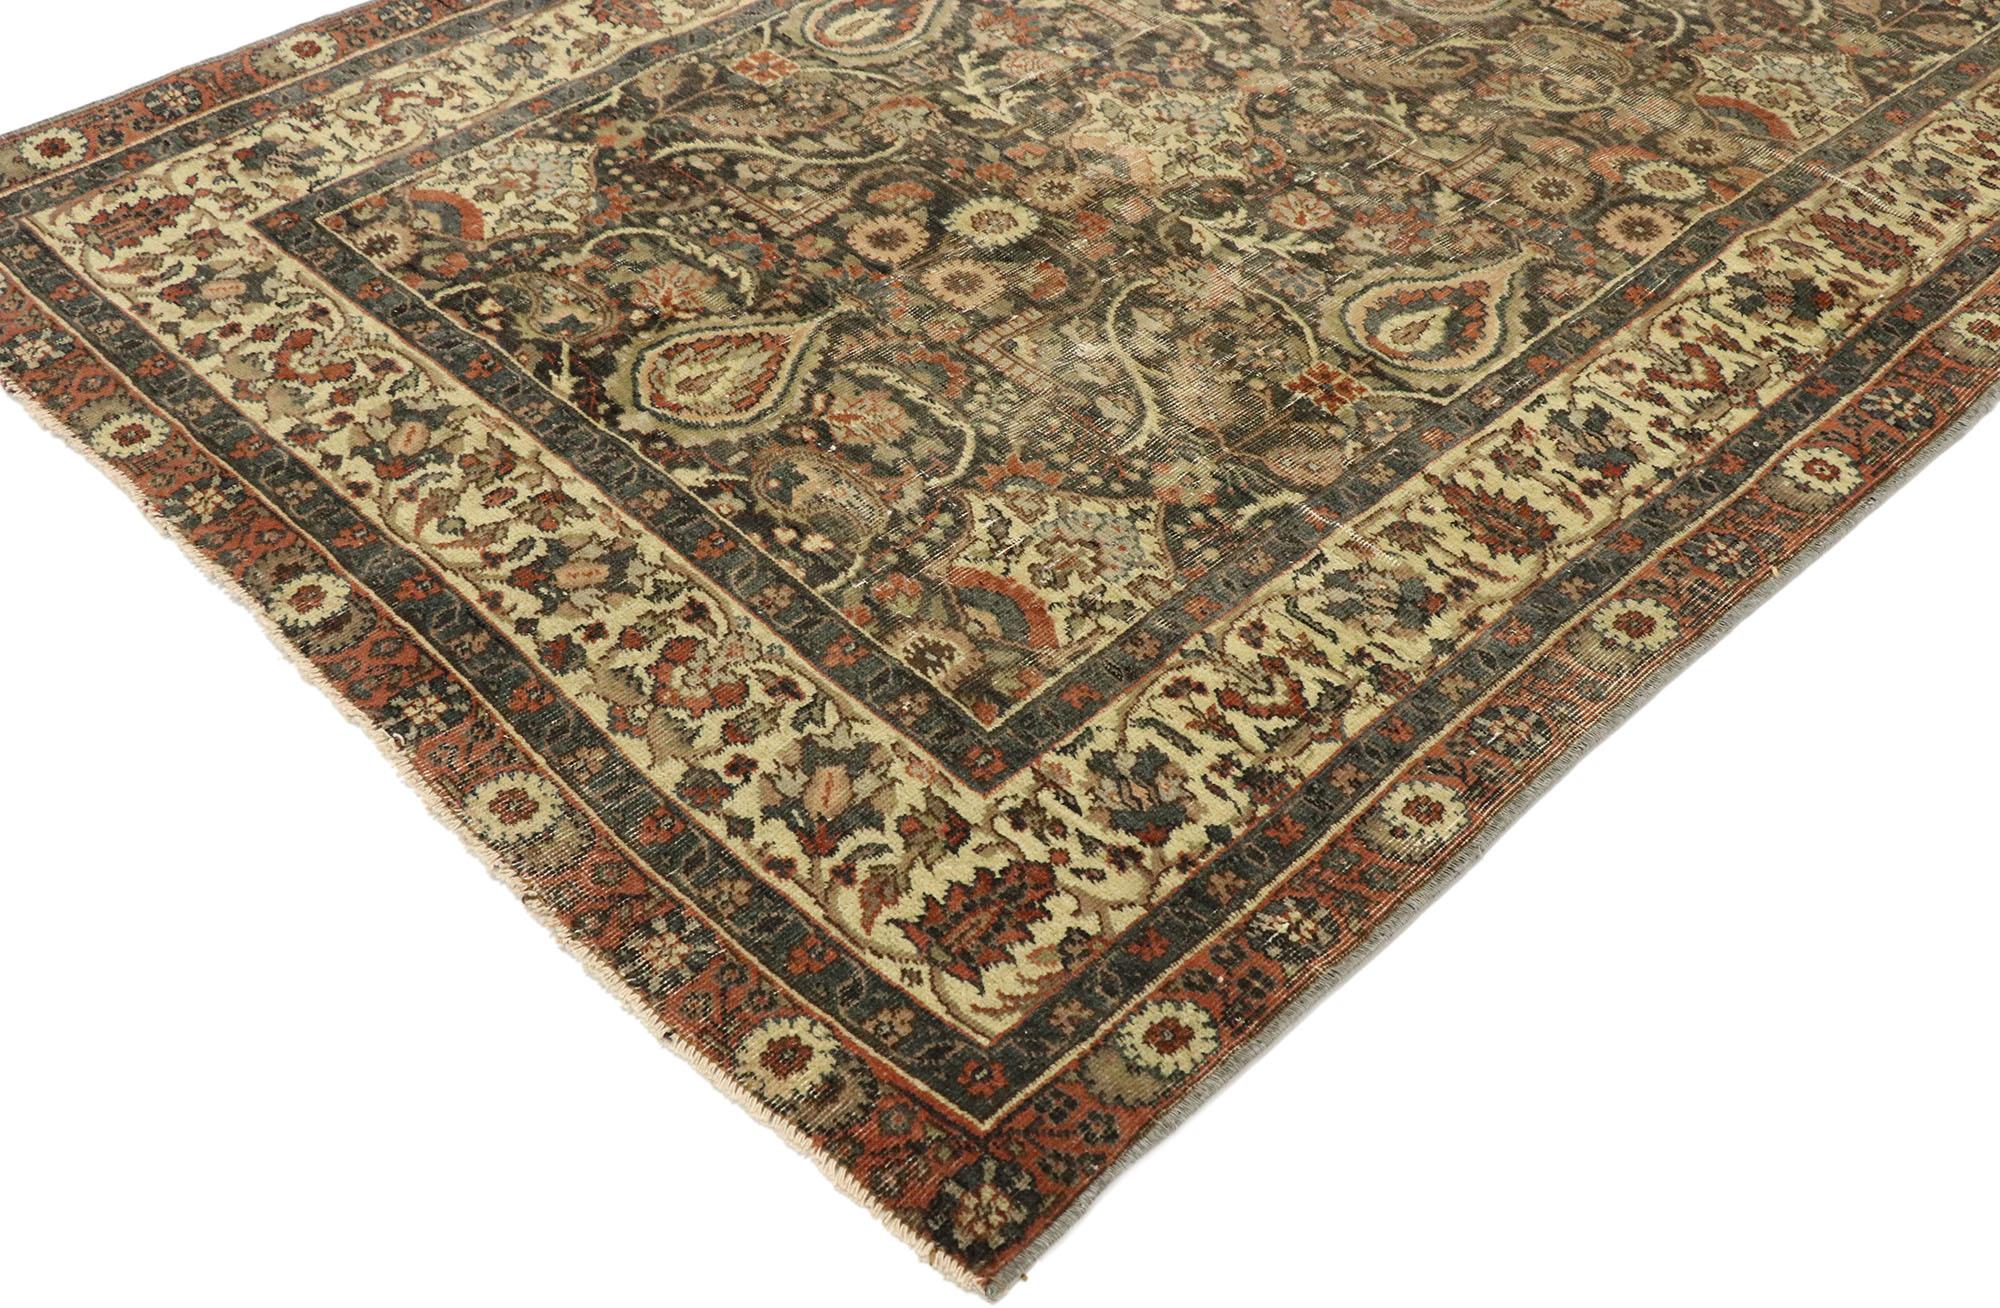 53065, distressed antique Turkish Sivas rug with rustic Belgian style. Bespeaking understated elegance and rustic sensibility, this hand knotted wool distressed vintage Turkish Sivas rug is the embodiment of Belgian style. The lovingly time-worn